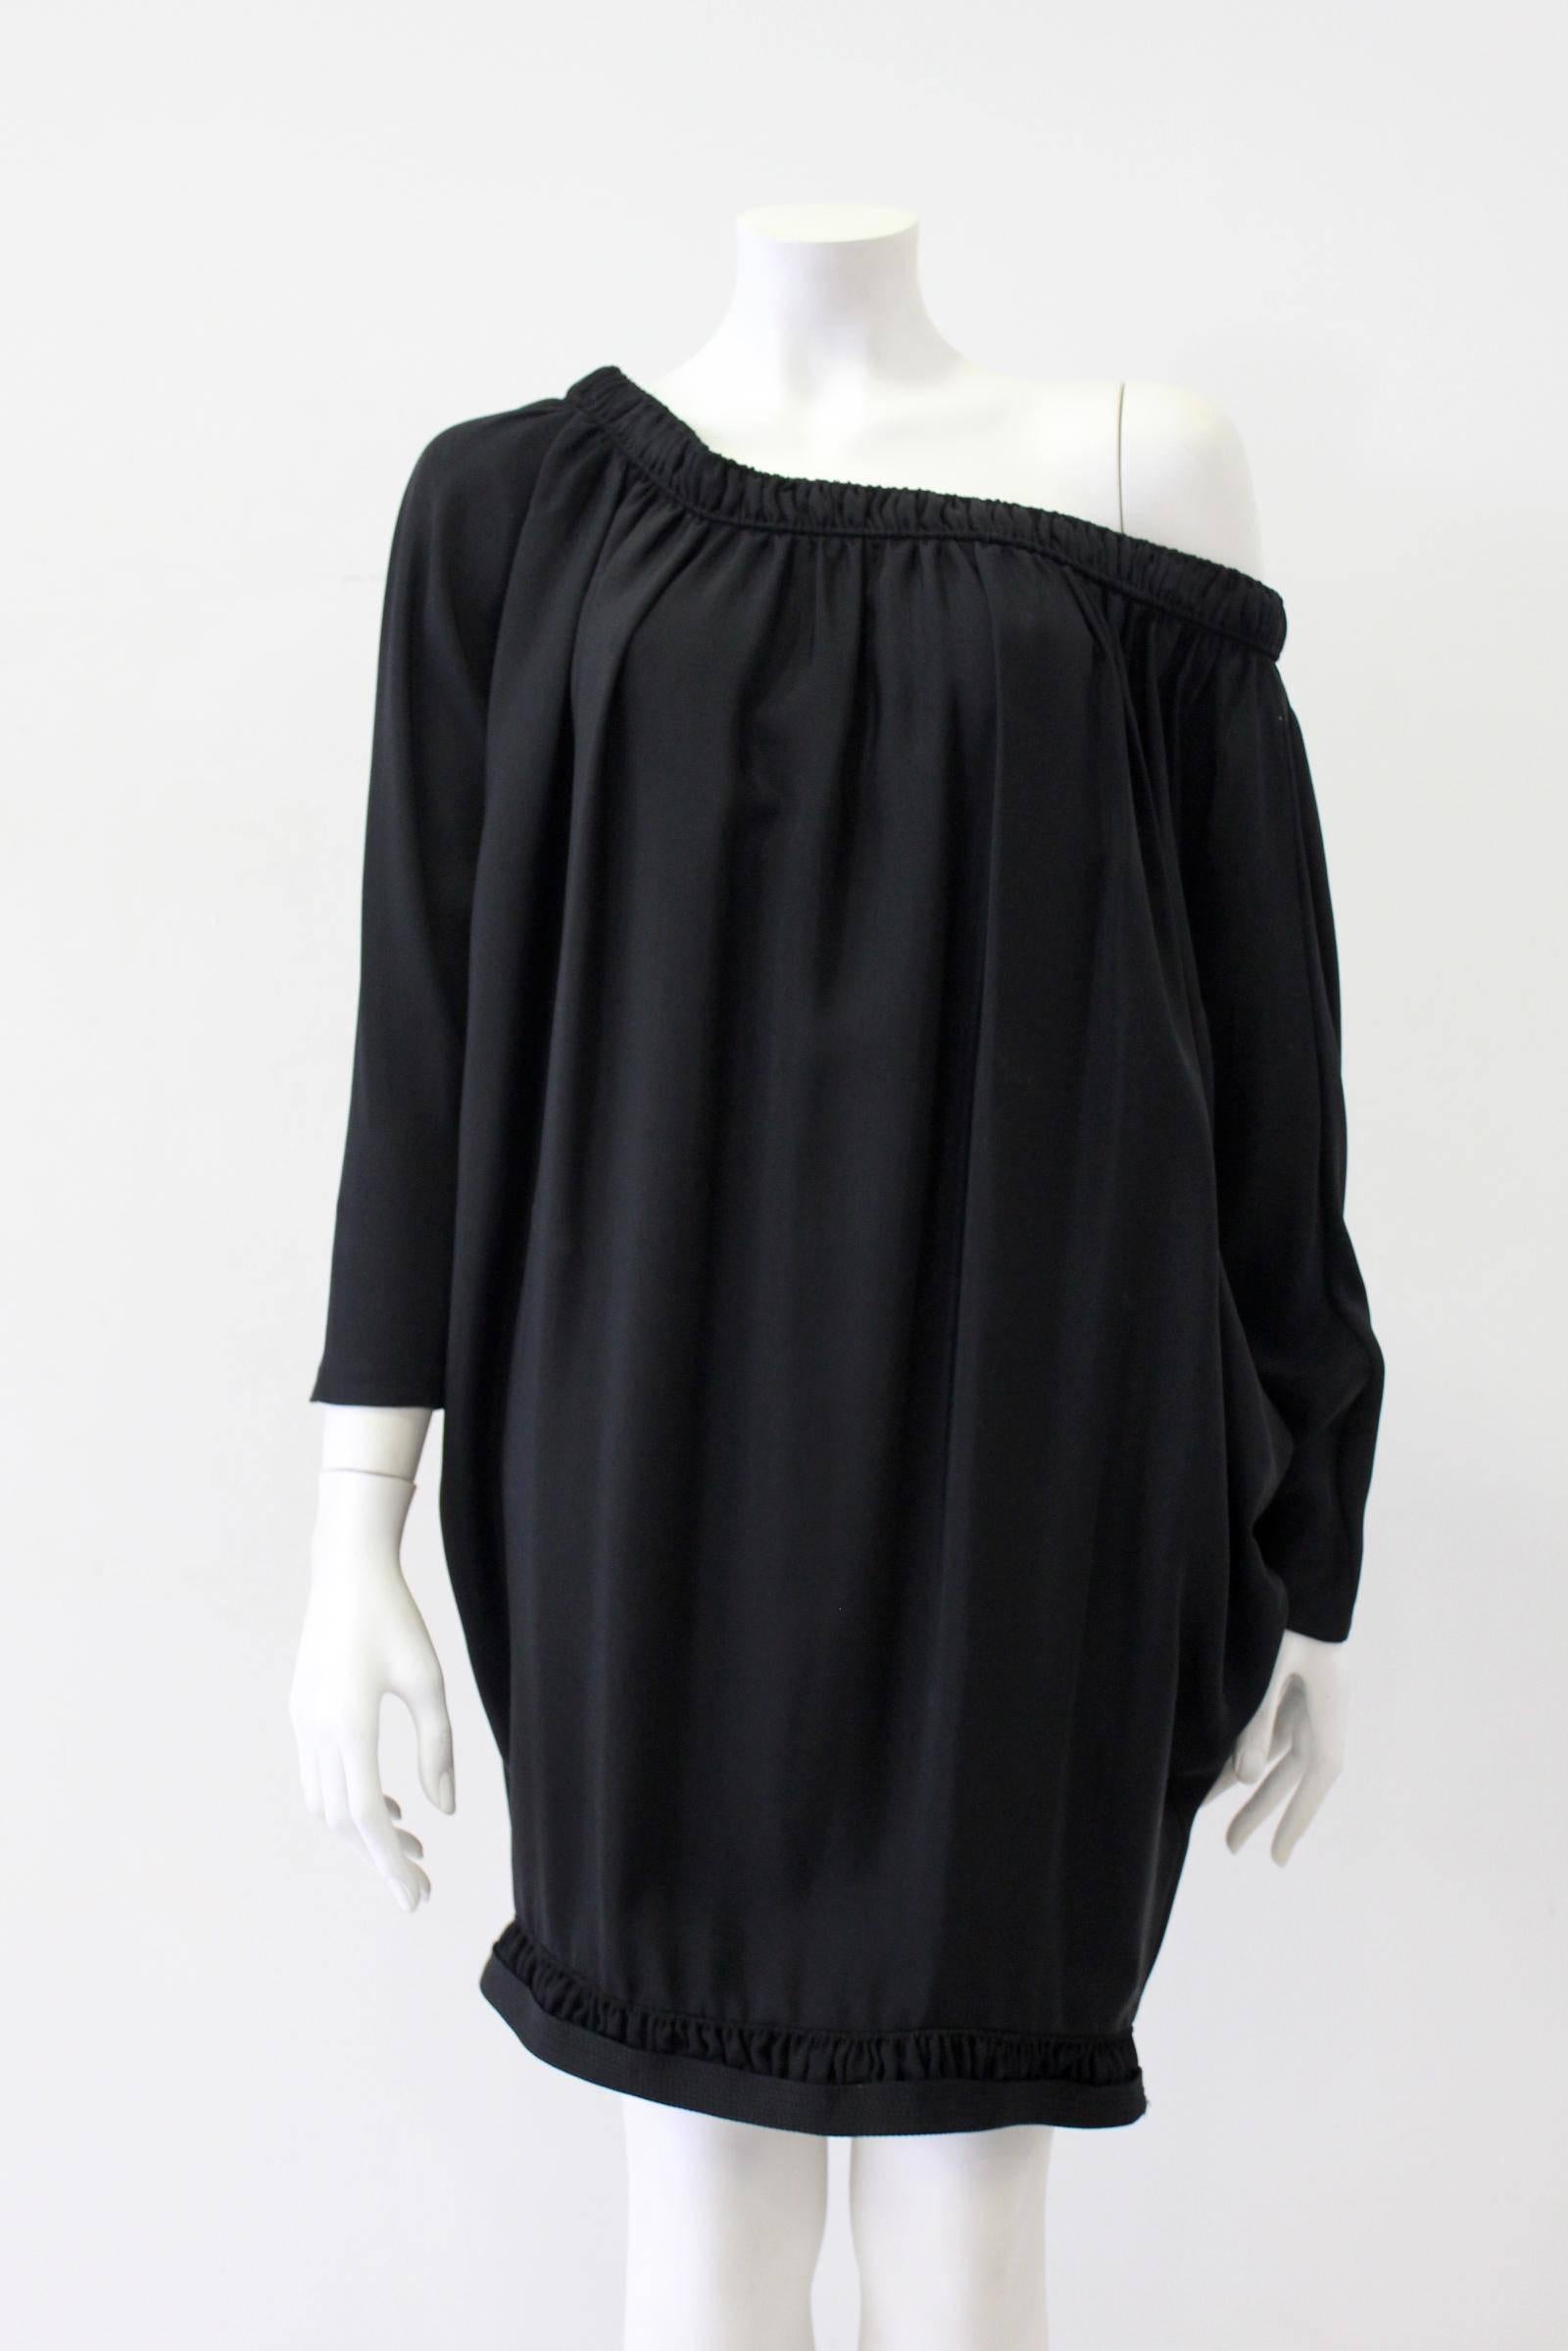 Women's Rare Gianni Versace Couture Silk Dress Fall 1990 For Sale